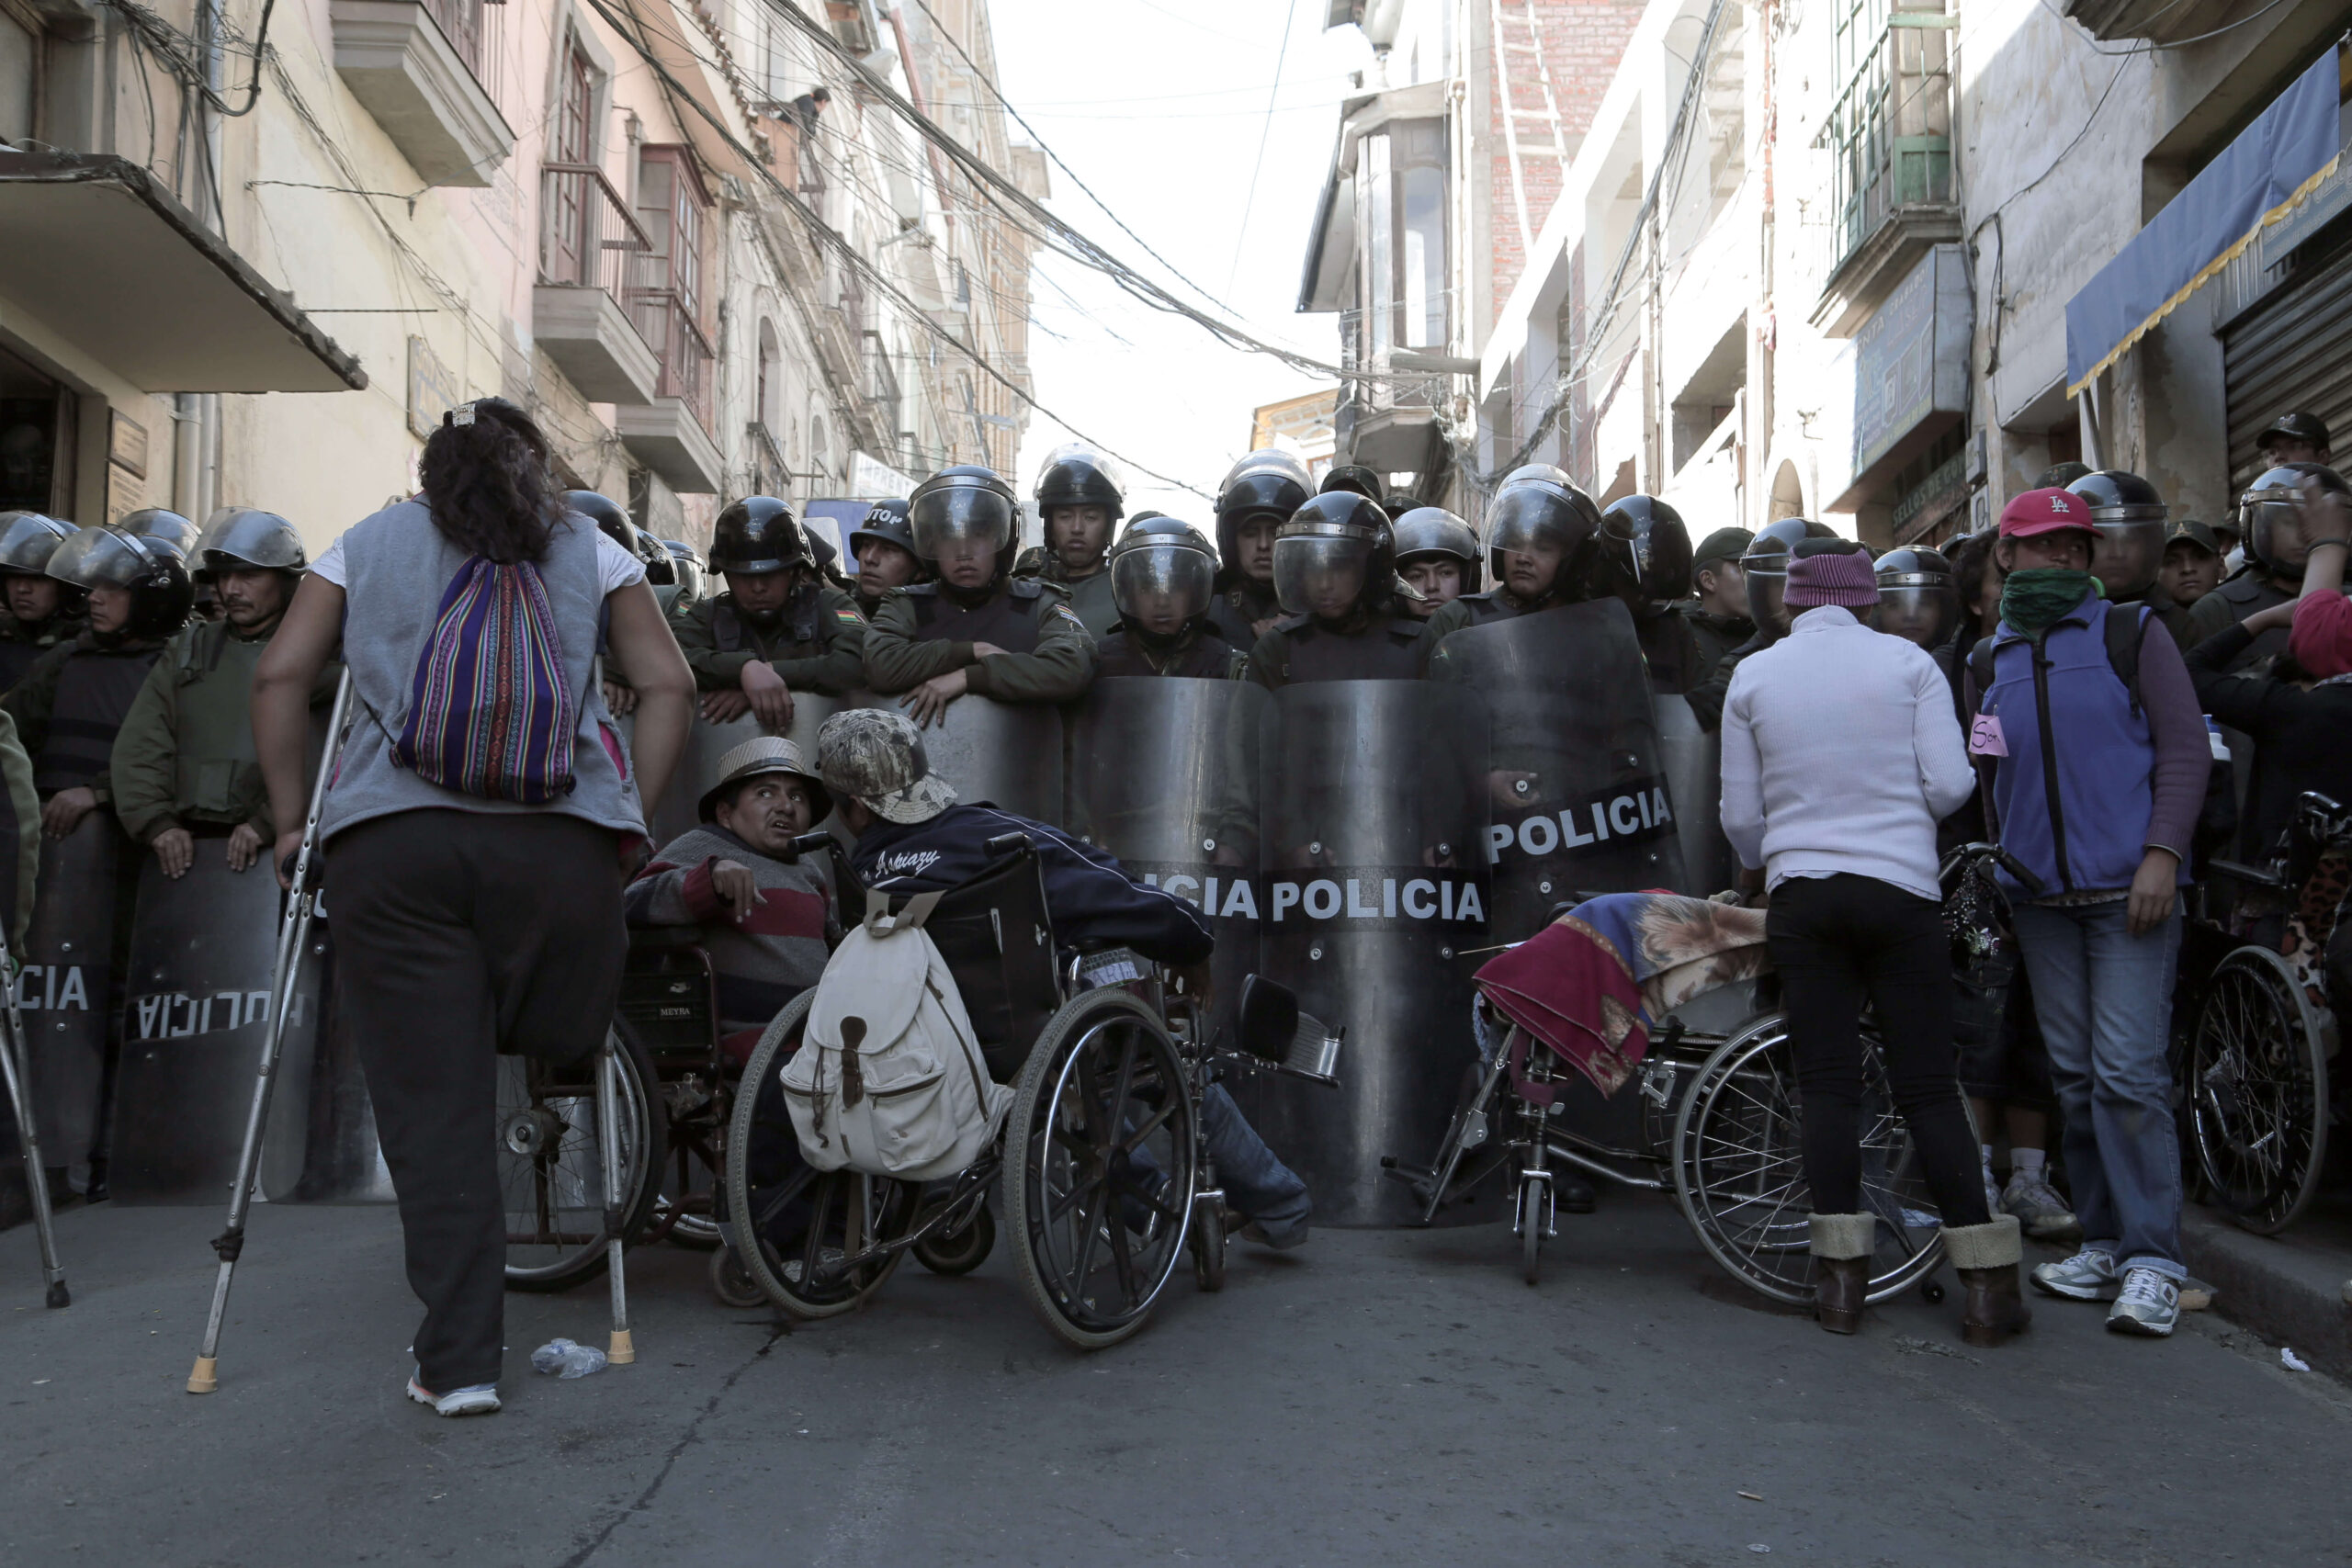 A group of police officers in full gear stand with shields in front of four activists with various disabilities.